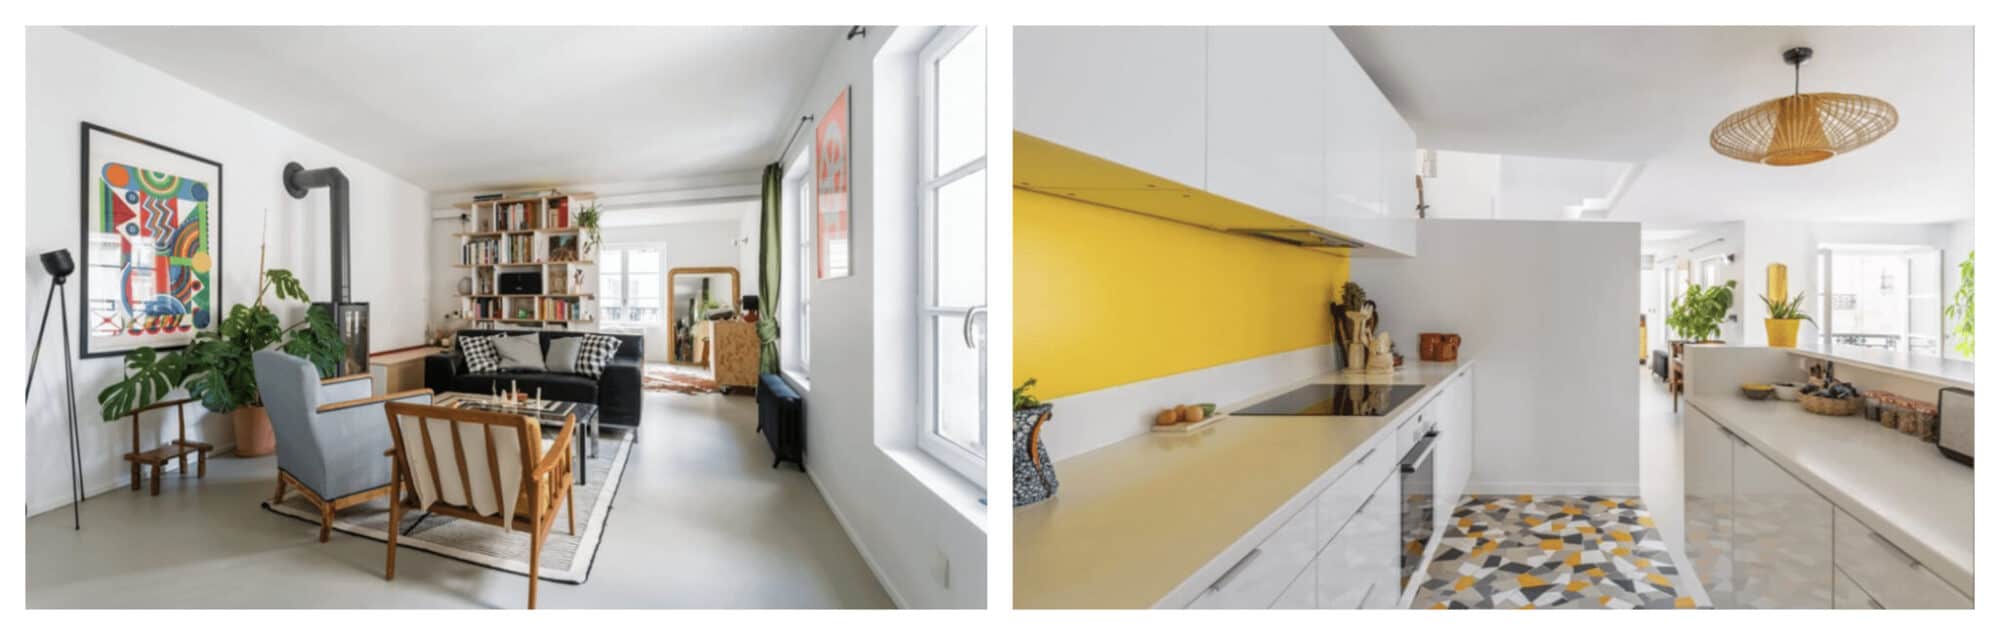 Left: A living room of an apartment in Republique area of Paris, decorated with a black fireplace, colorful paintings, and tall bookshelves; Right: The kitchen of the same apartment, decorated in yellow and white.